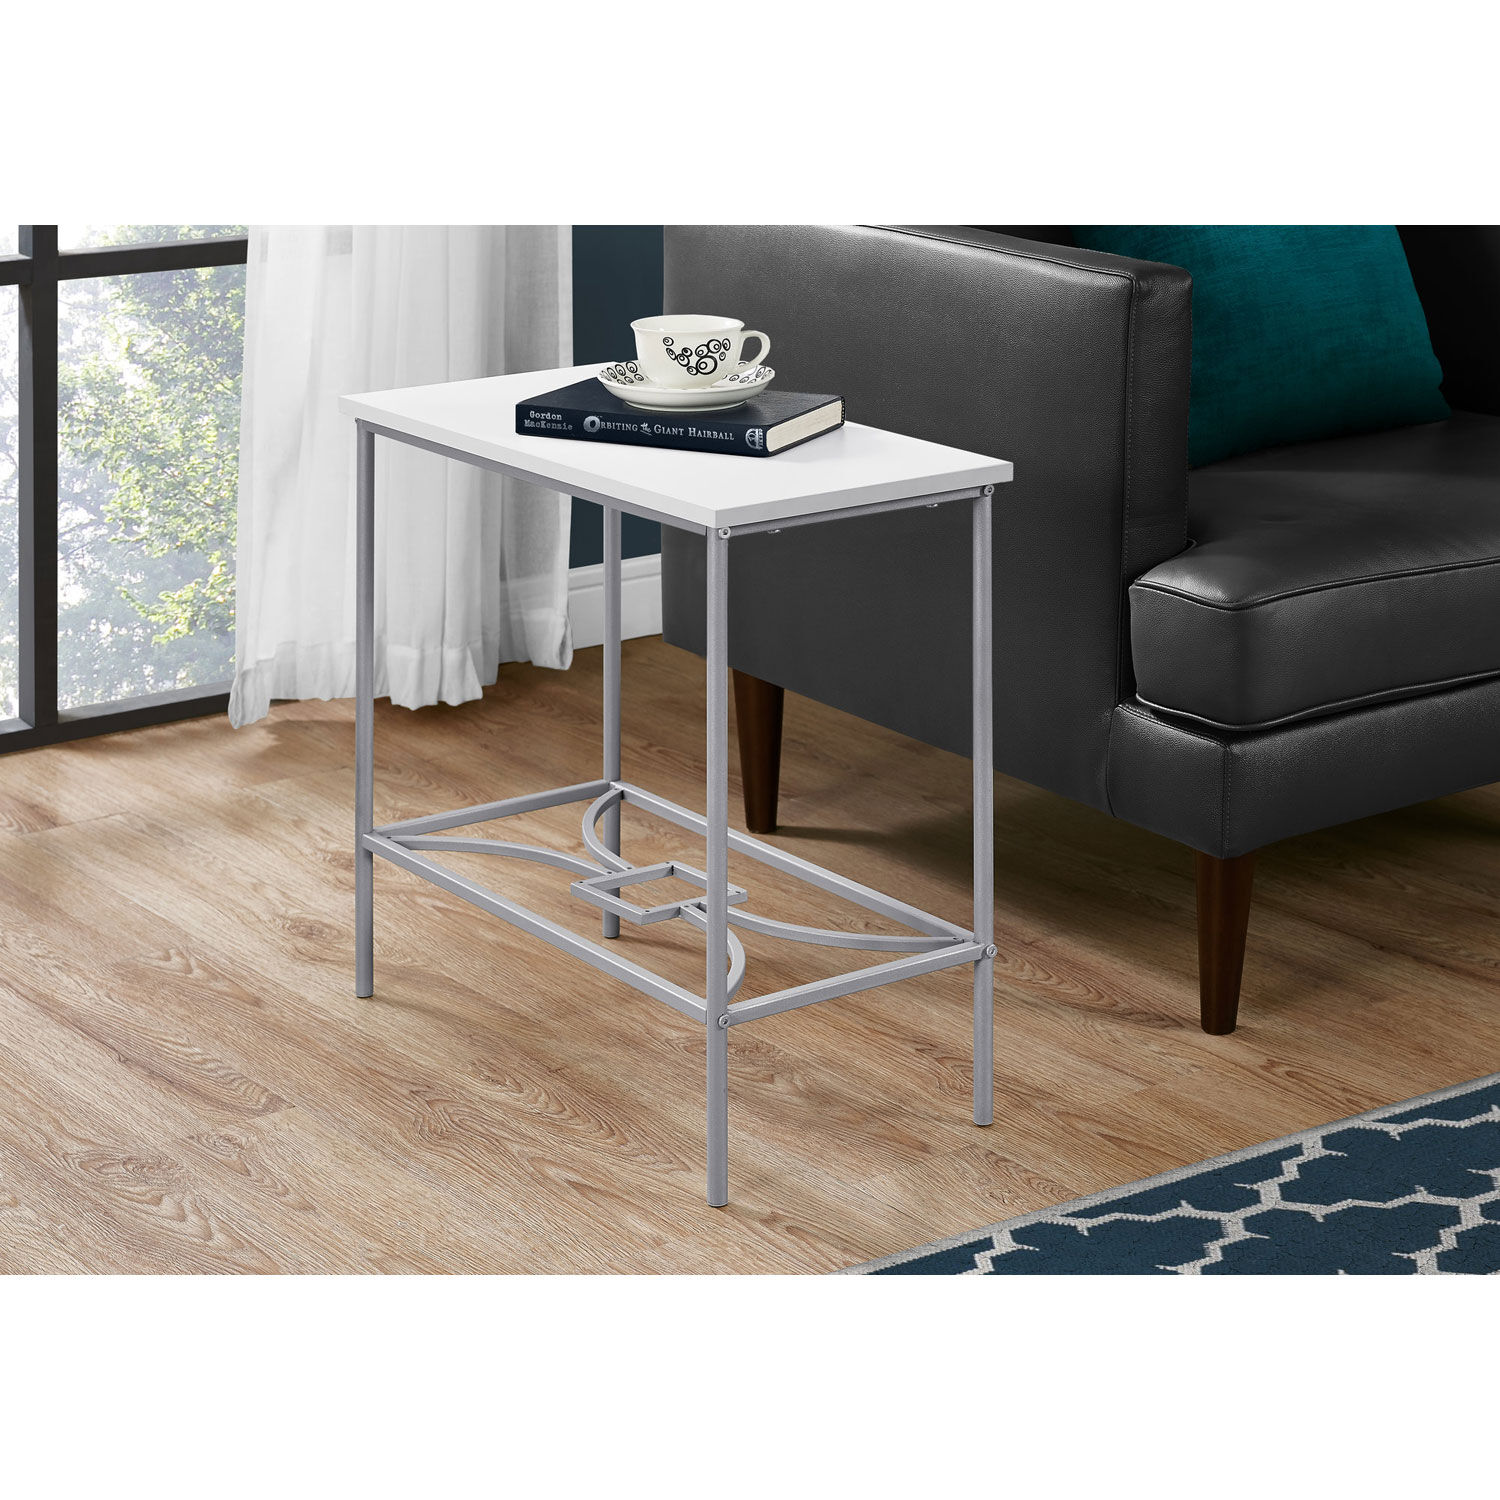 White Chrome Metal With A Magazine Rack Monarch Specialities Accent Table 